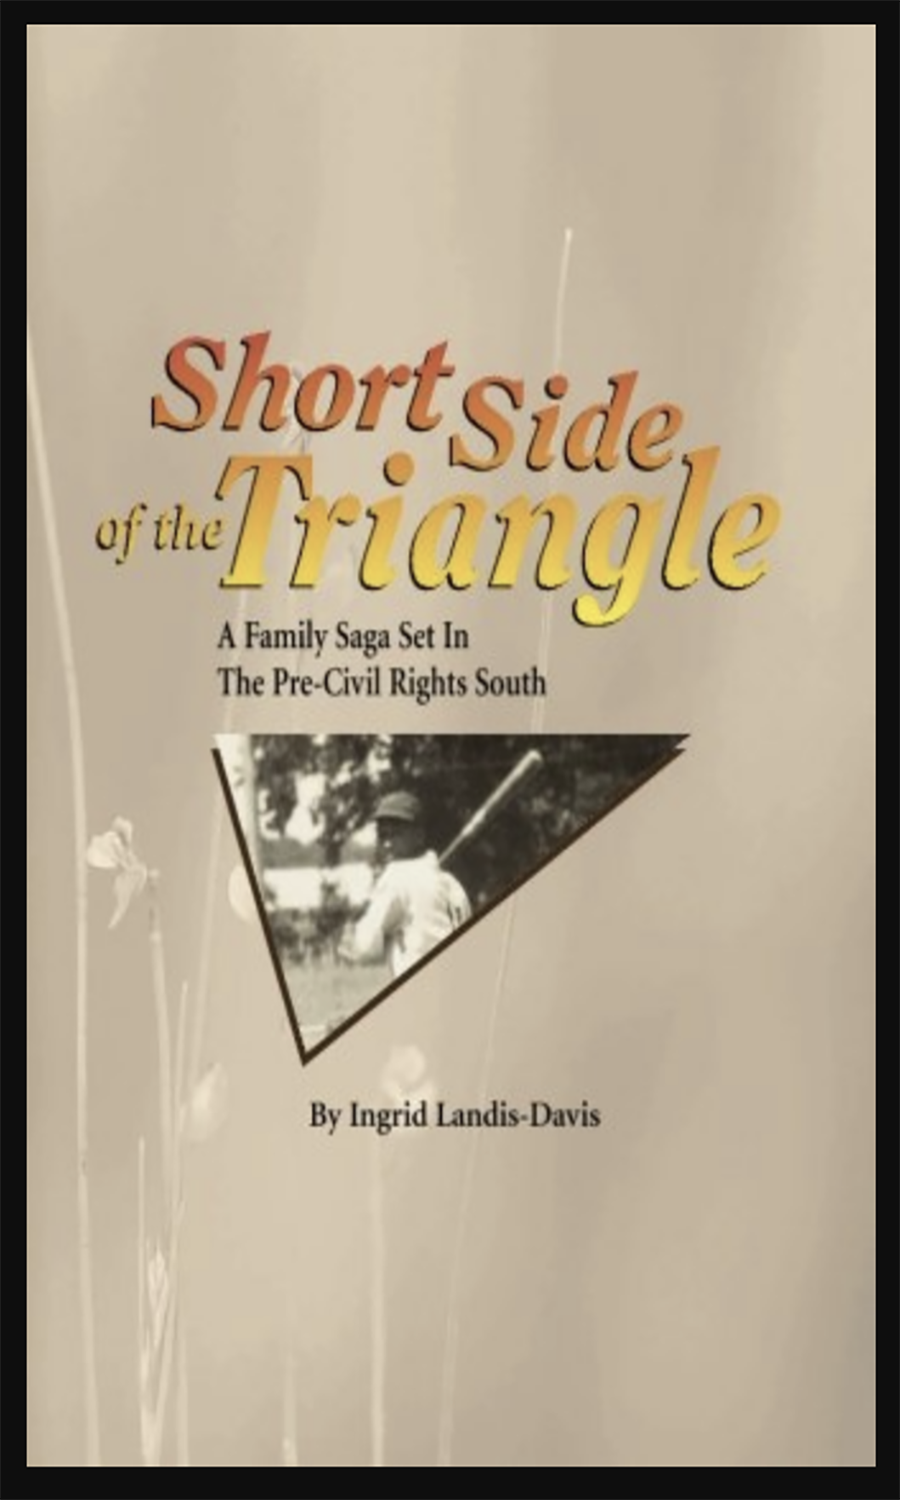 Short Side of the Triangle by Ingrid Landis